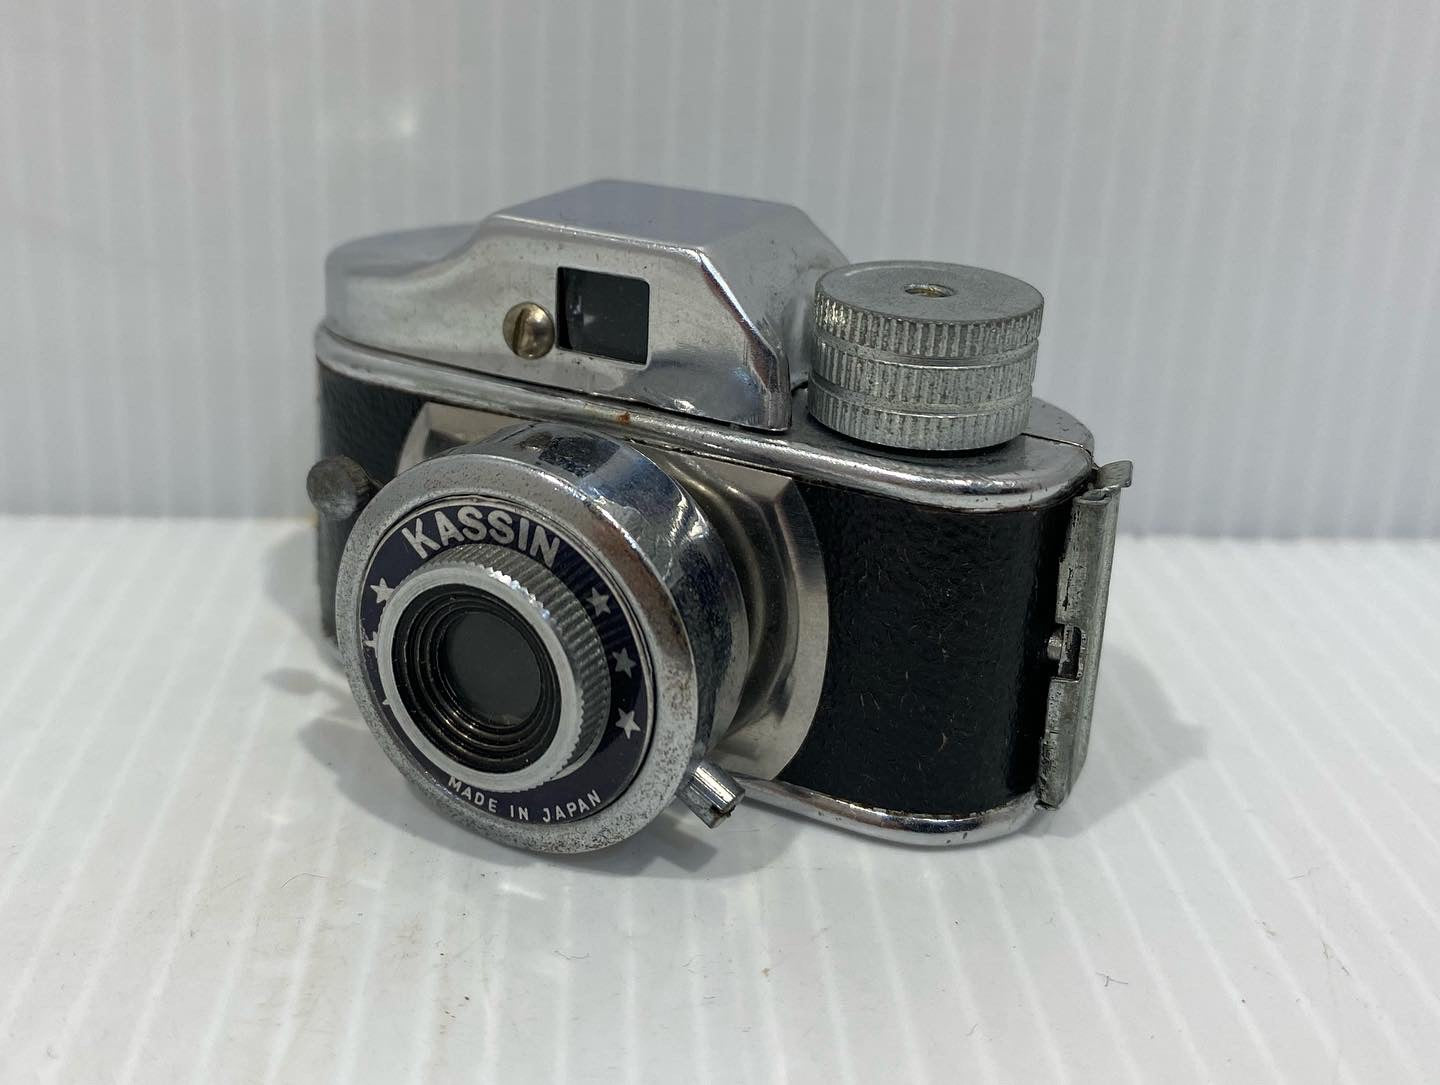 Vintage 1950's Miniature Kassin mini Camera with original leather case. Made in Japan!